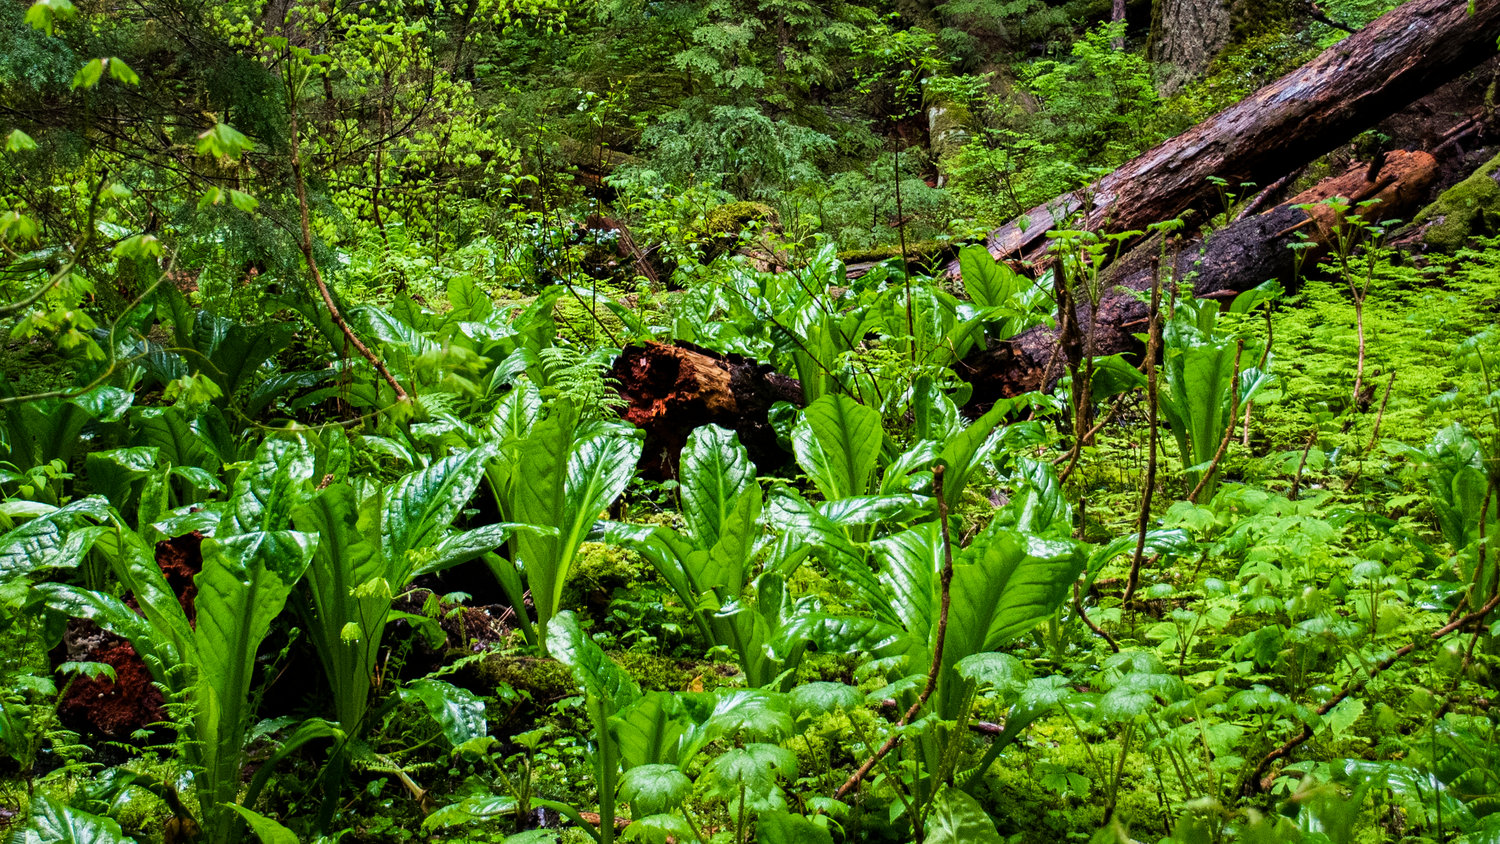 Skunk cabbage rises from the mucky forest floor at Ohanapecosh on Sunday afternoon.